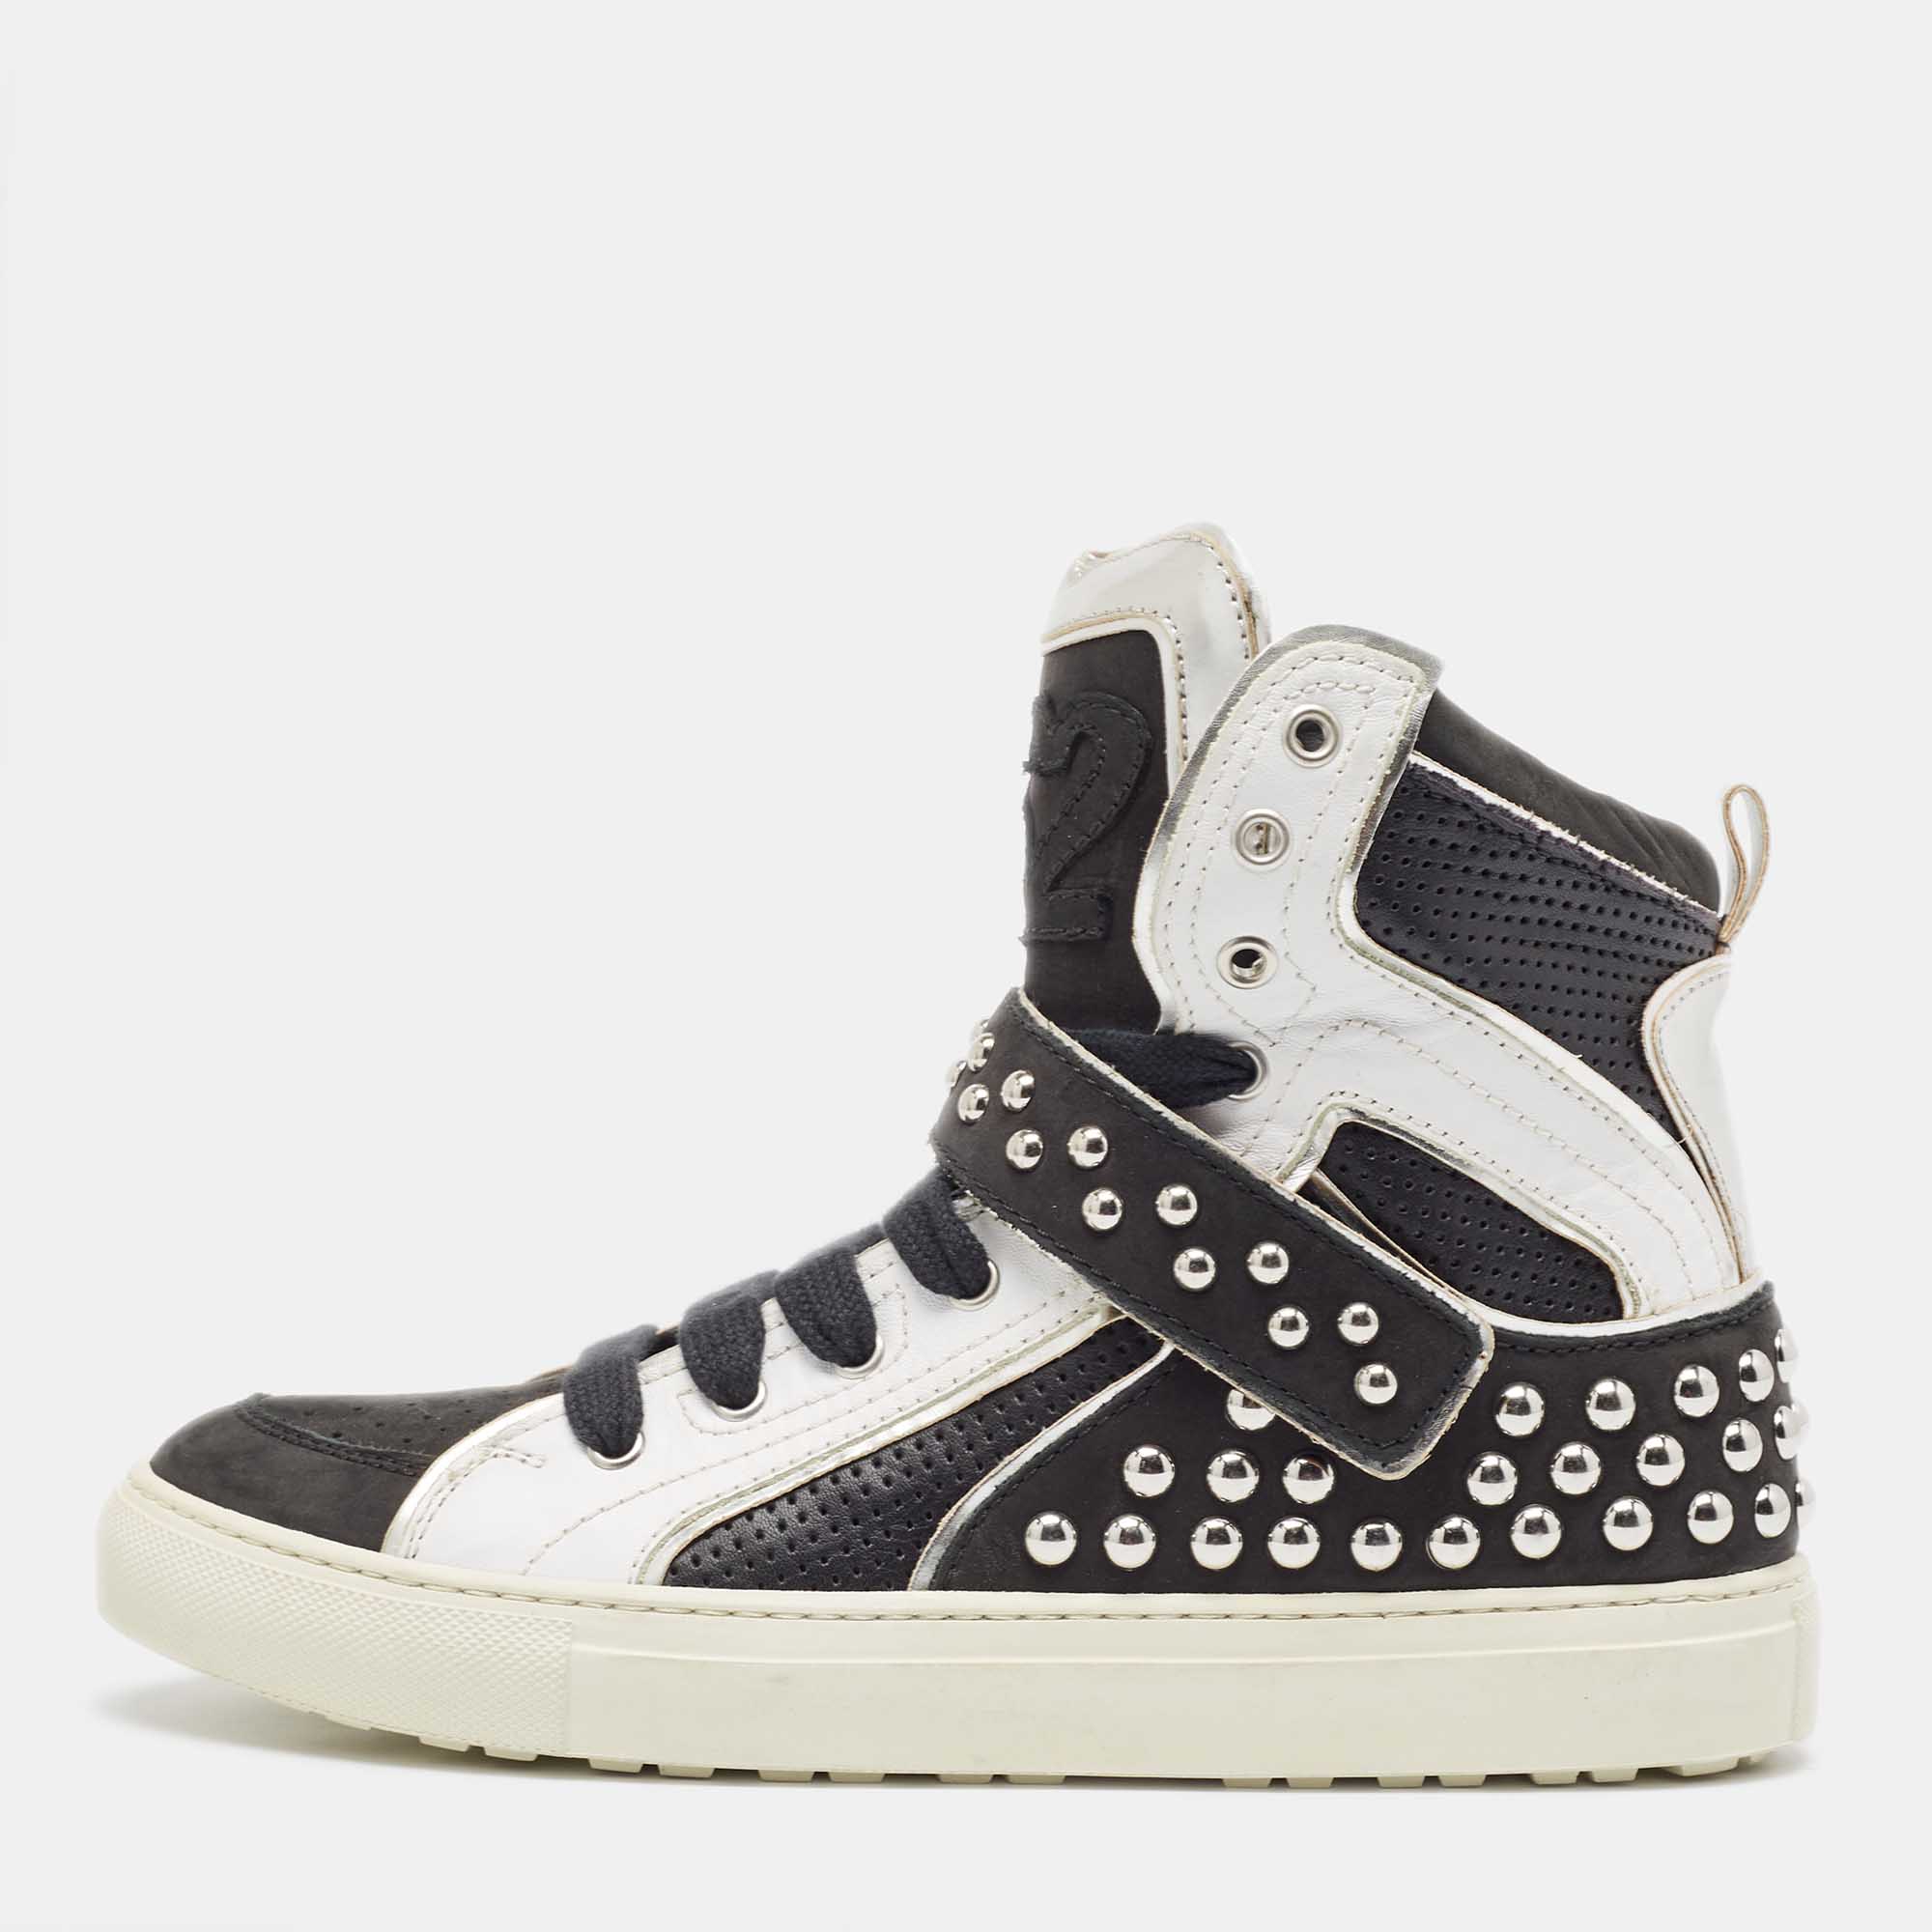 

Dsquared2 Black/Silver Leather Studded High Top Sneakers Size